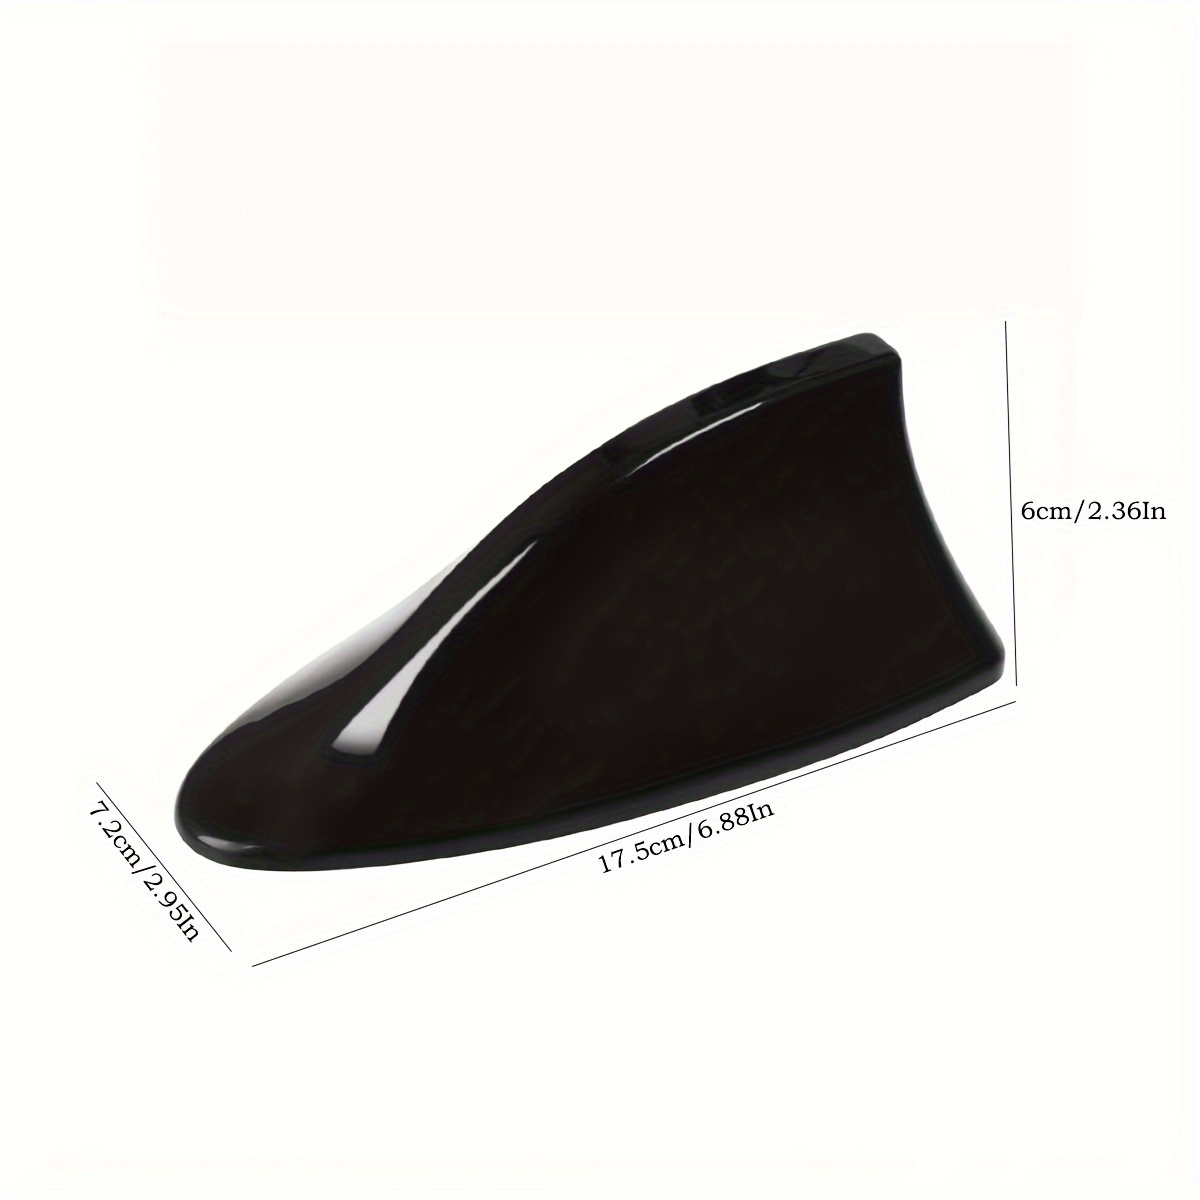  Shark Fin Antenna Cover for Car, Automotive Top Roof